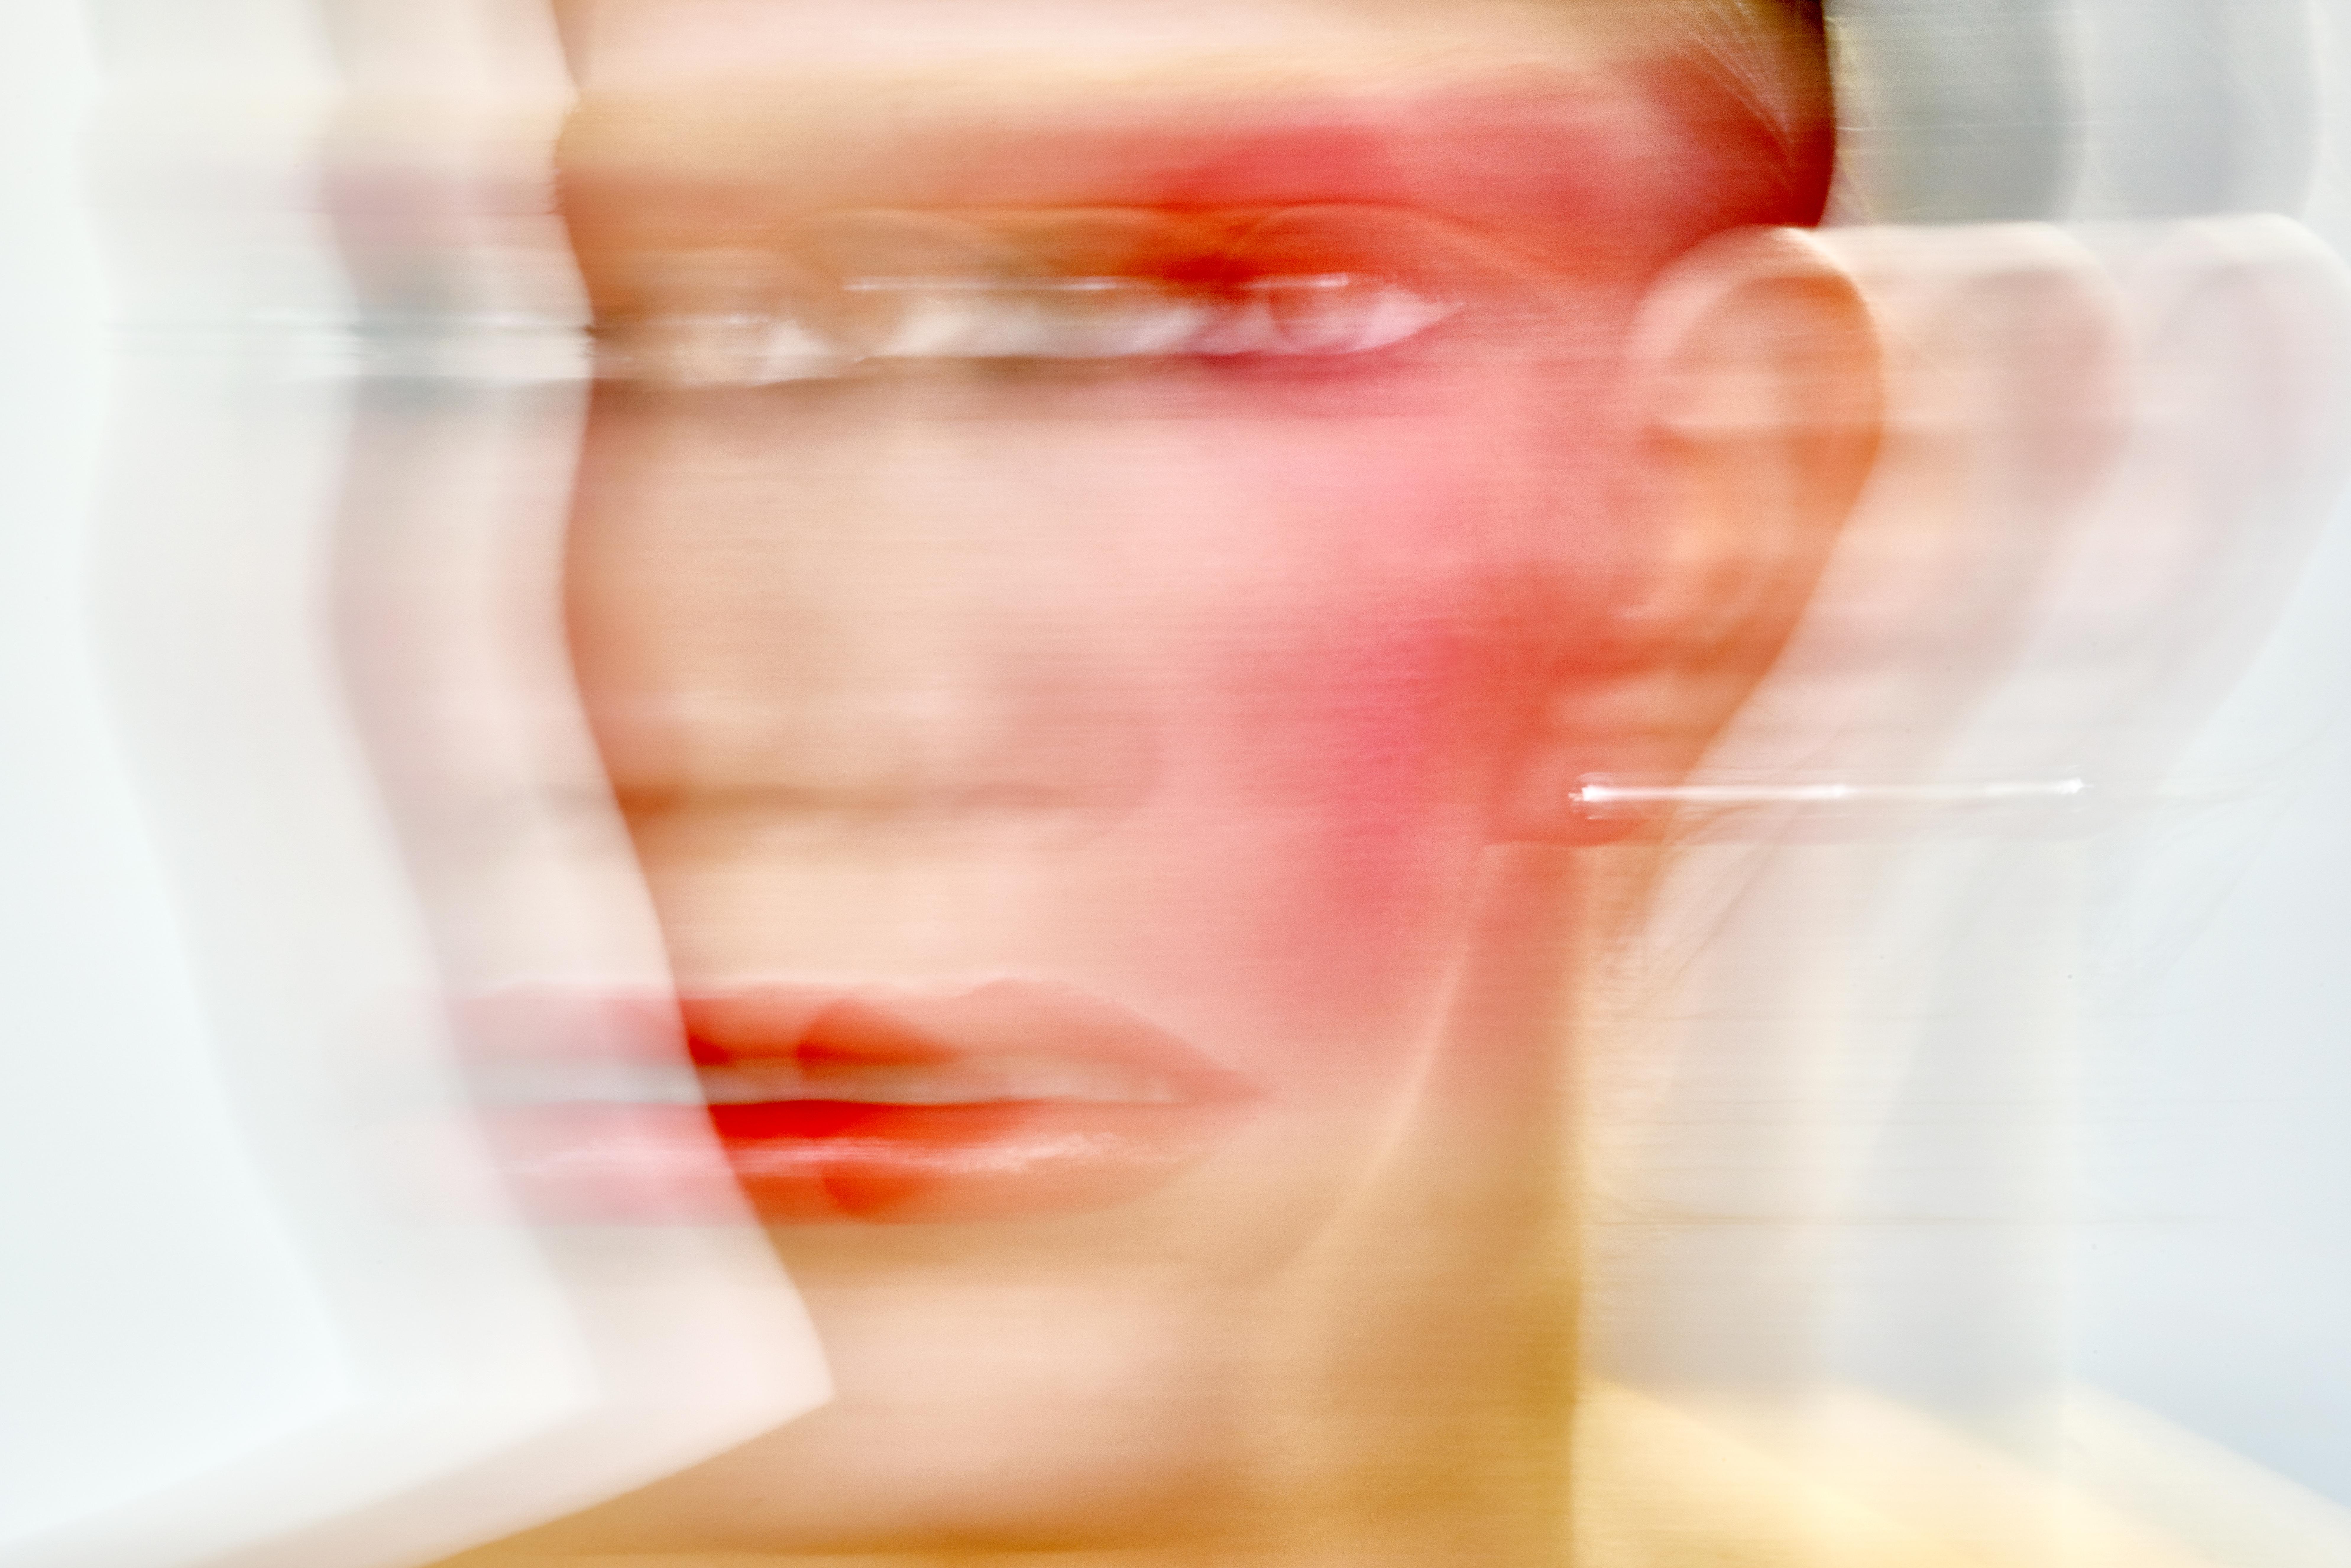 A blurred image of a young woman’s face